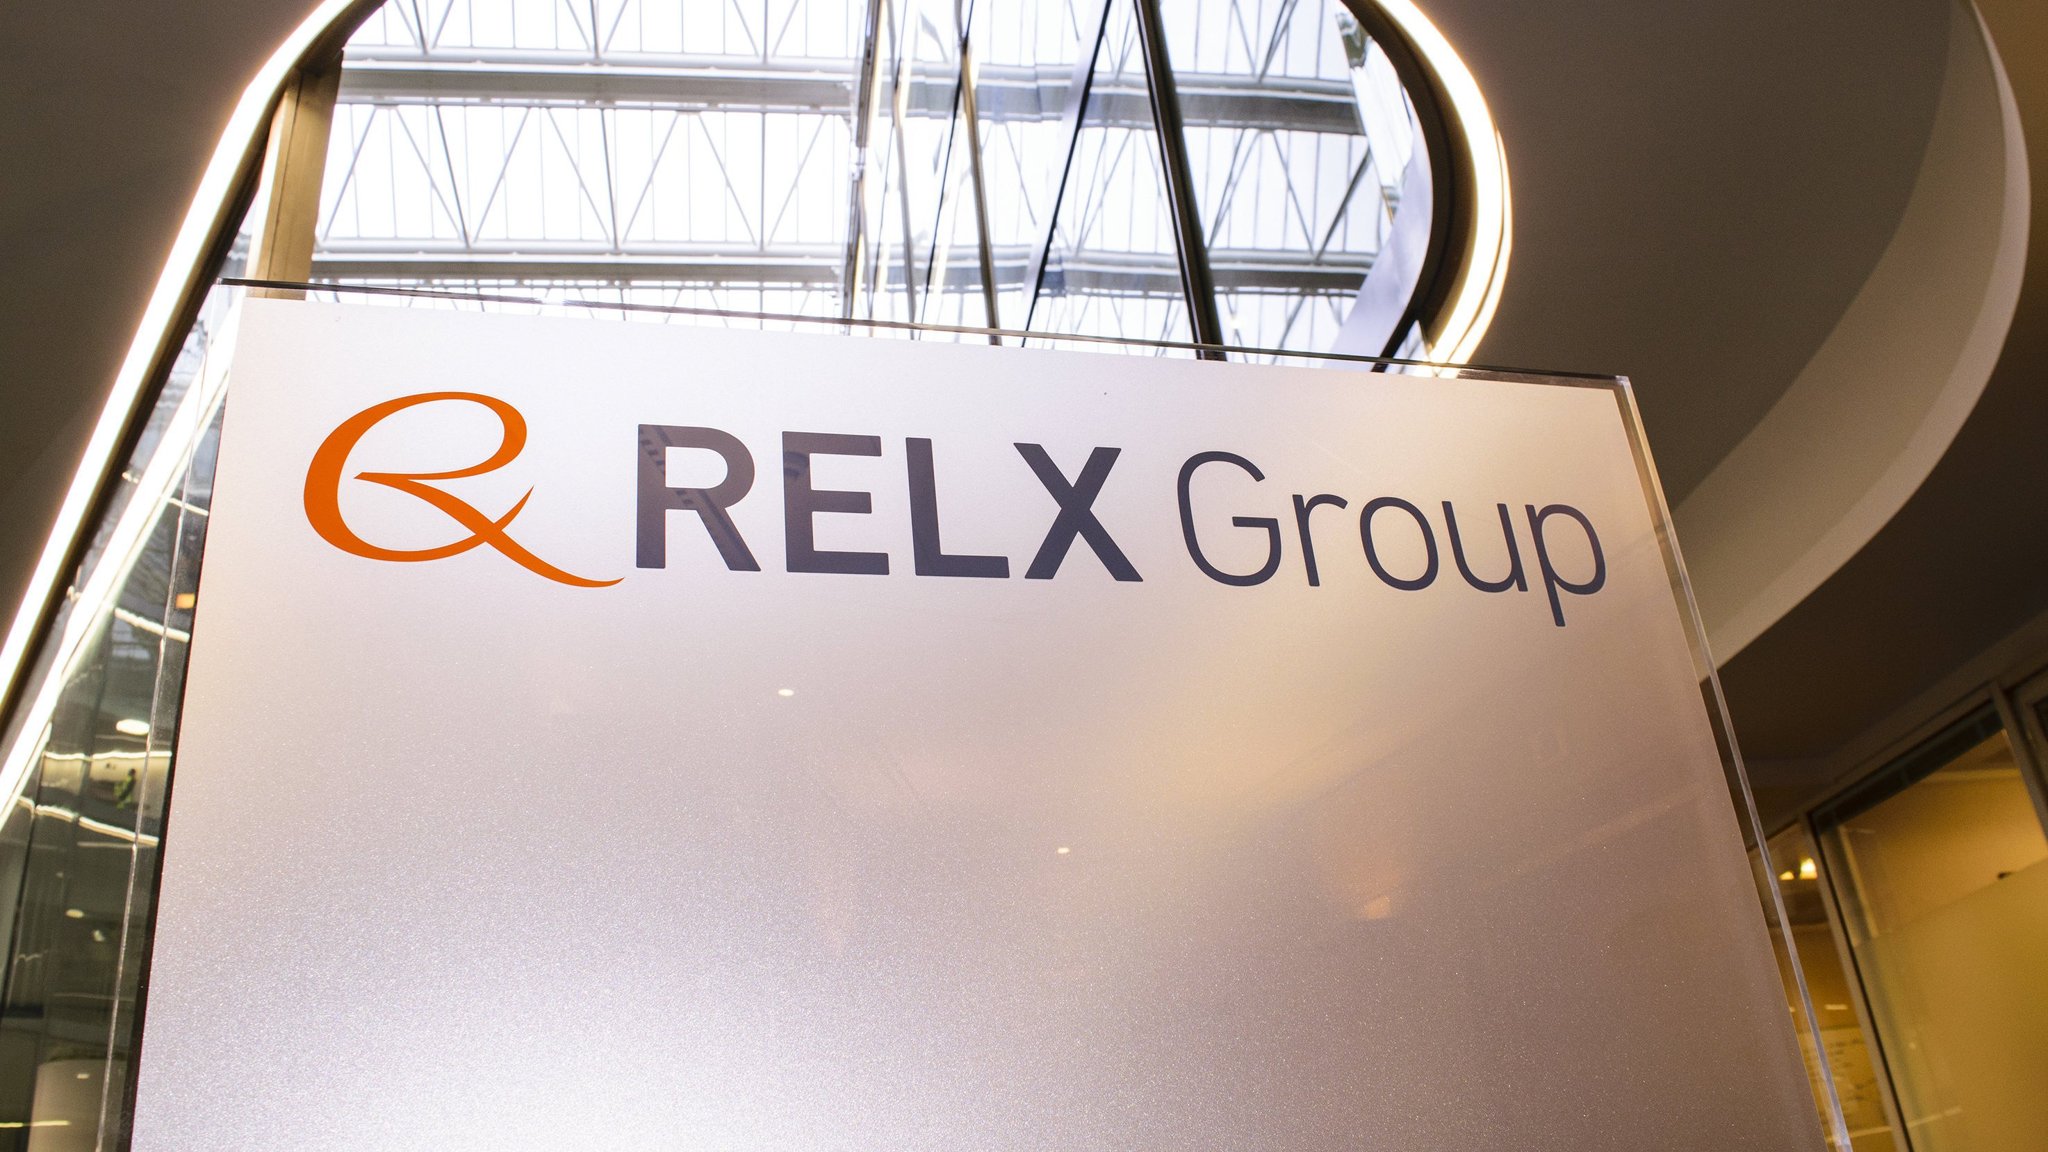 Relx logo and branding on a banner in a building